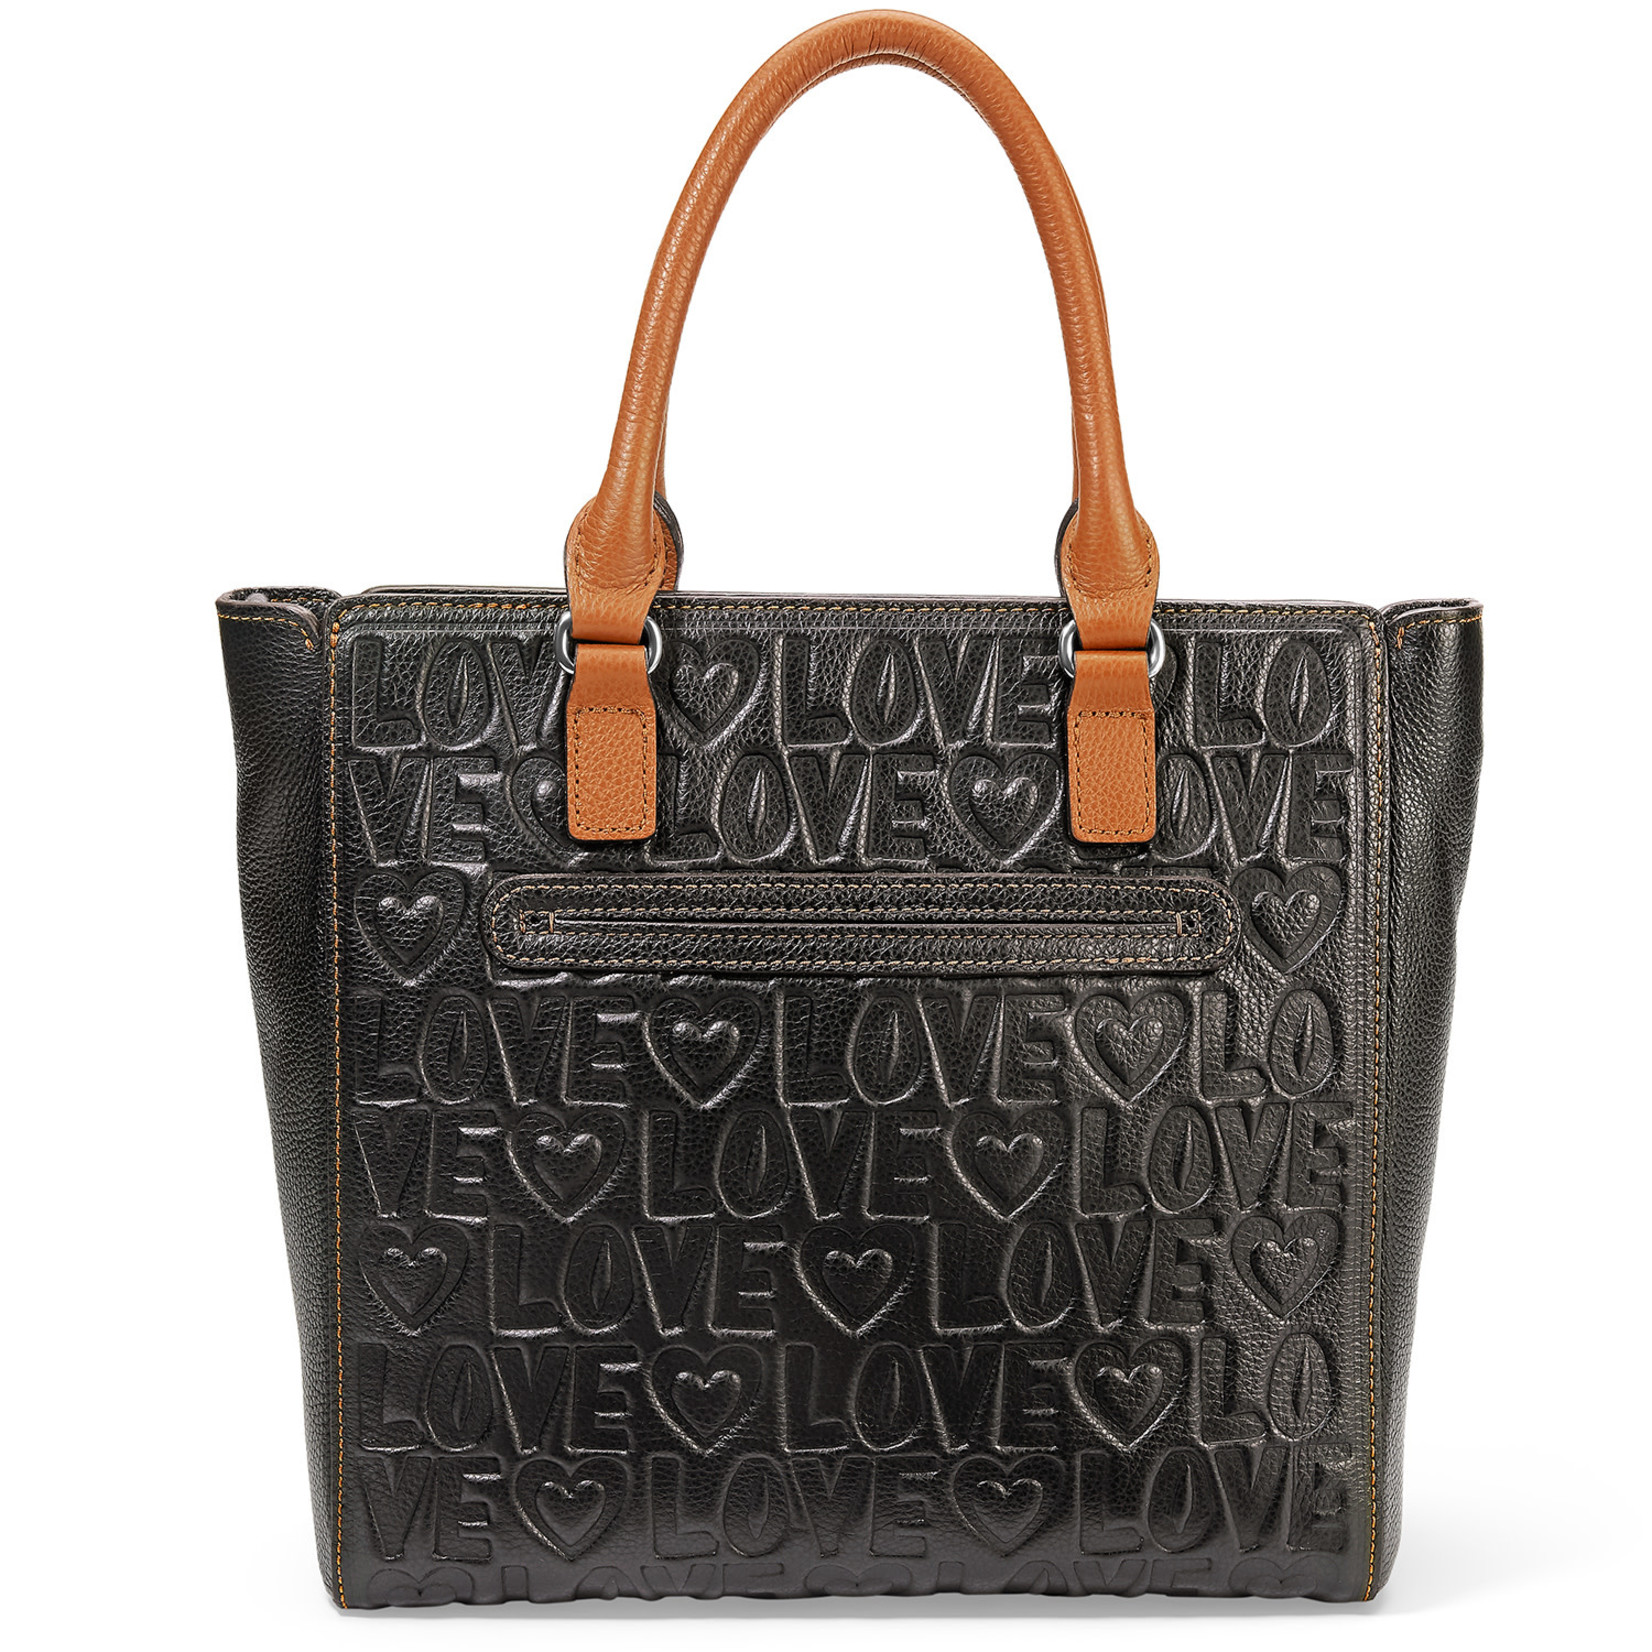 Brighton Deeply In Love Hand-Held Tote - Black, OS